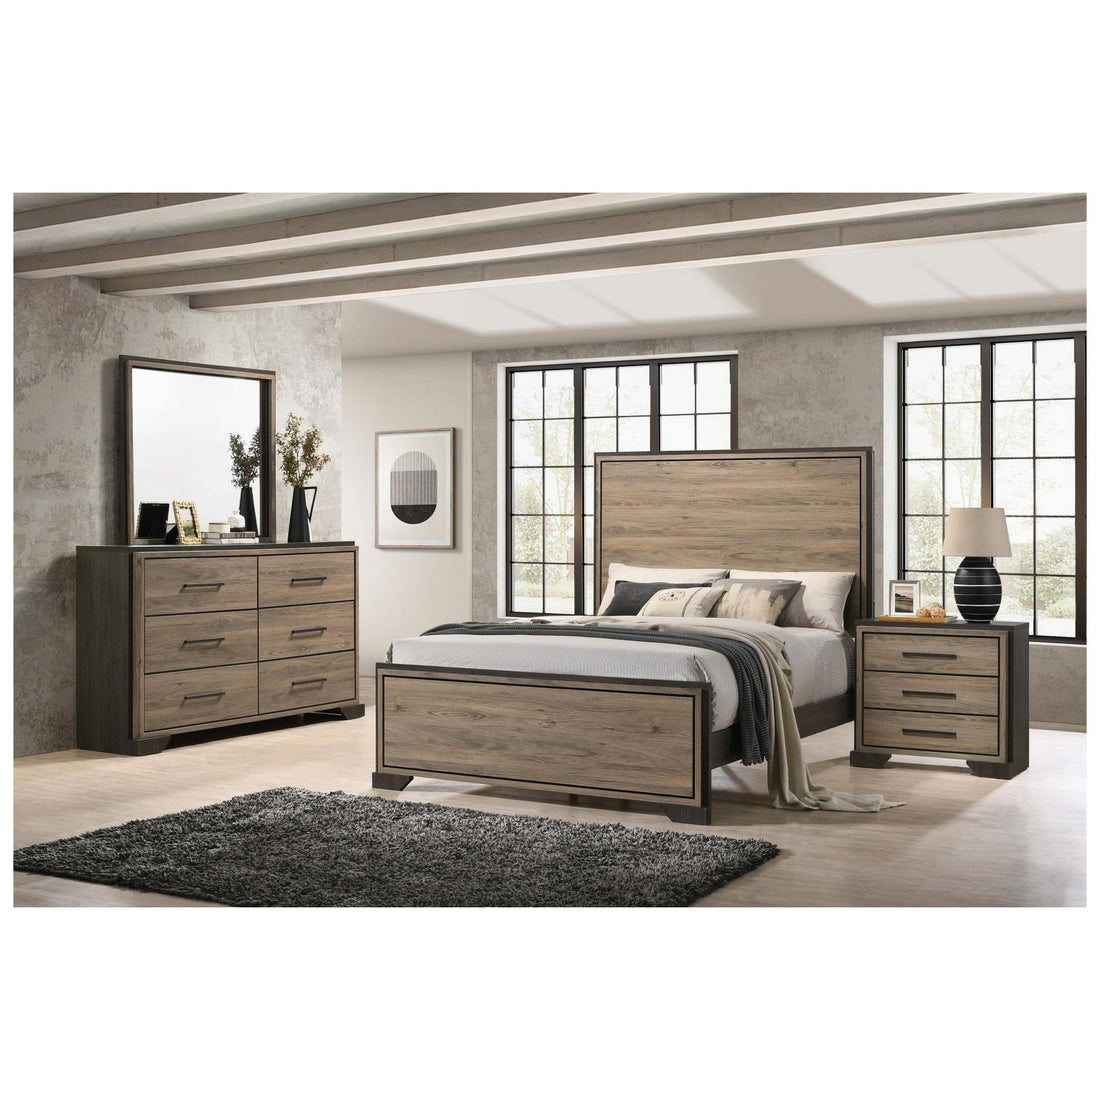 Baker 4-piece California King Bedroom Set Brown and Light Taupe 224461KW-S4